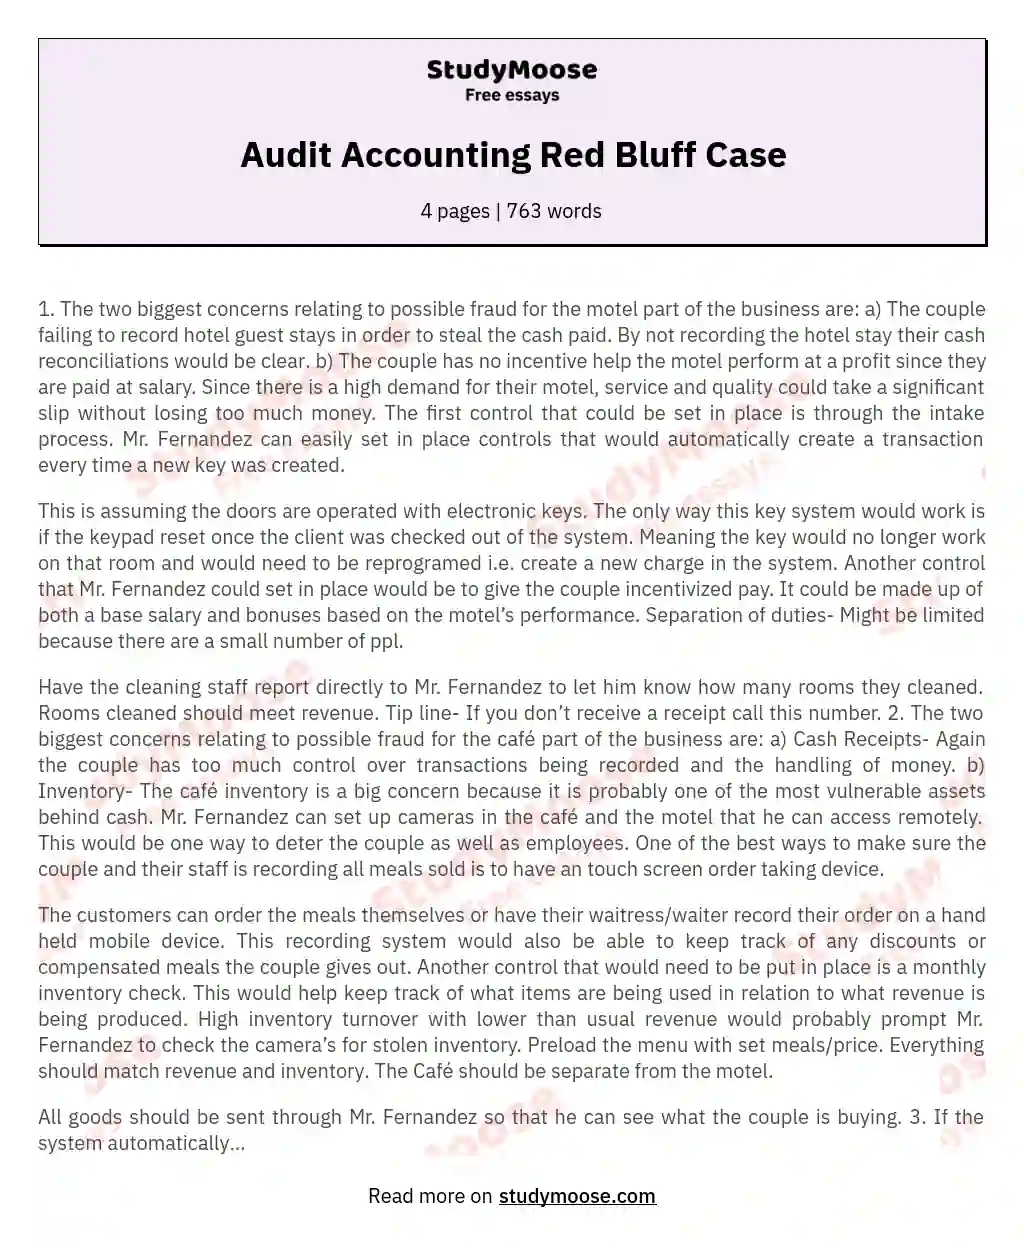 Audit Accounting Red Bluff Case essay